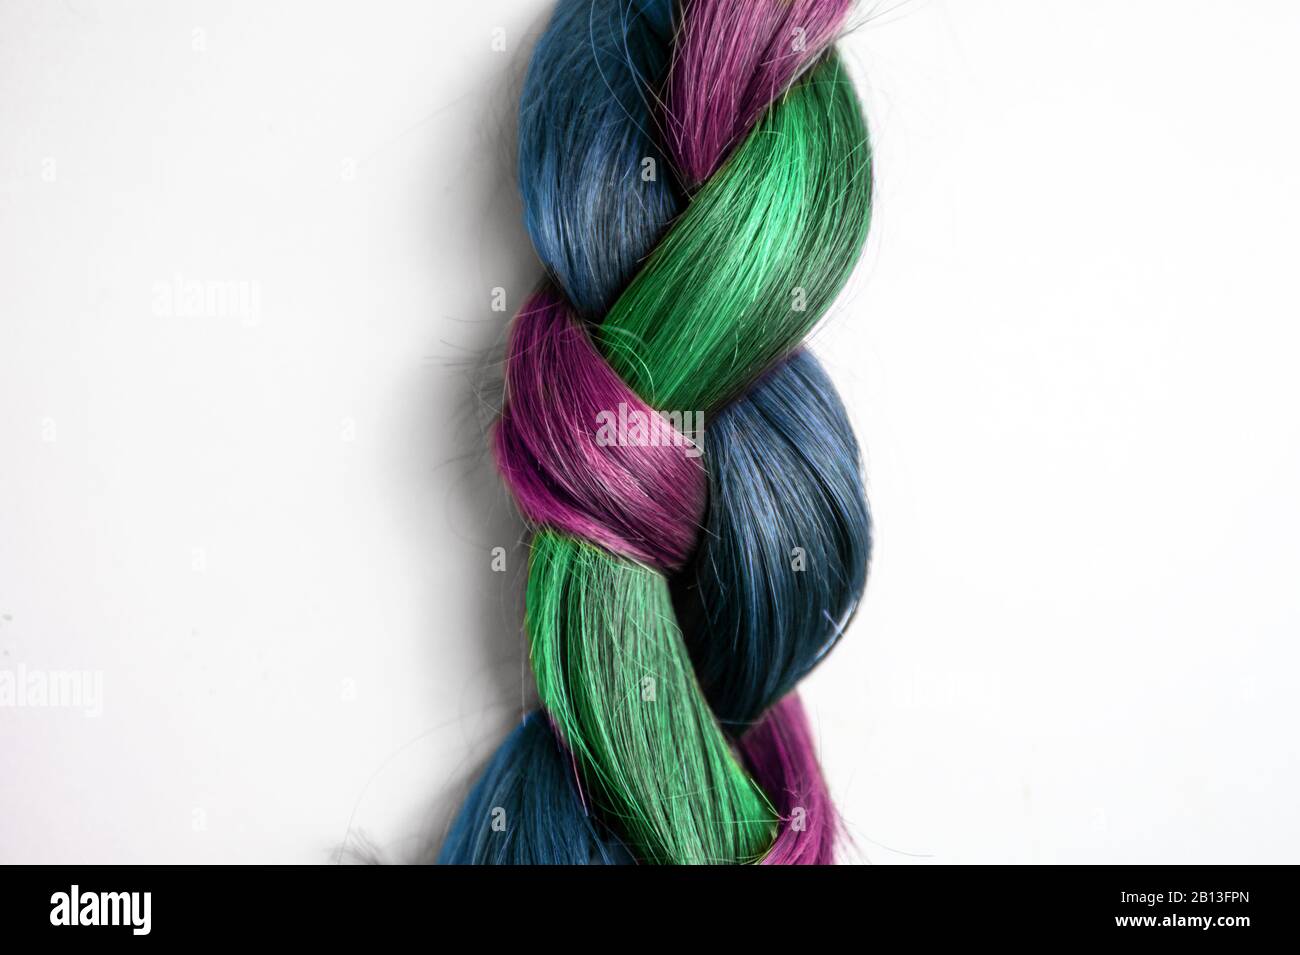 isolated colorful braid hair on white background close up Stock Photo